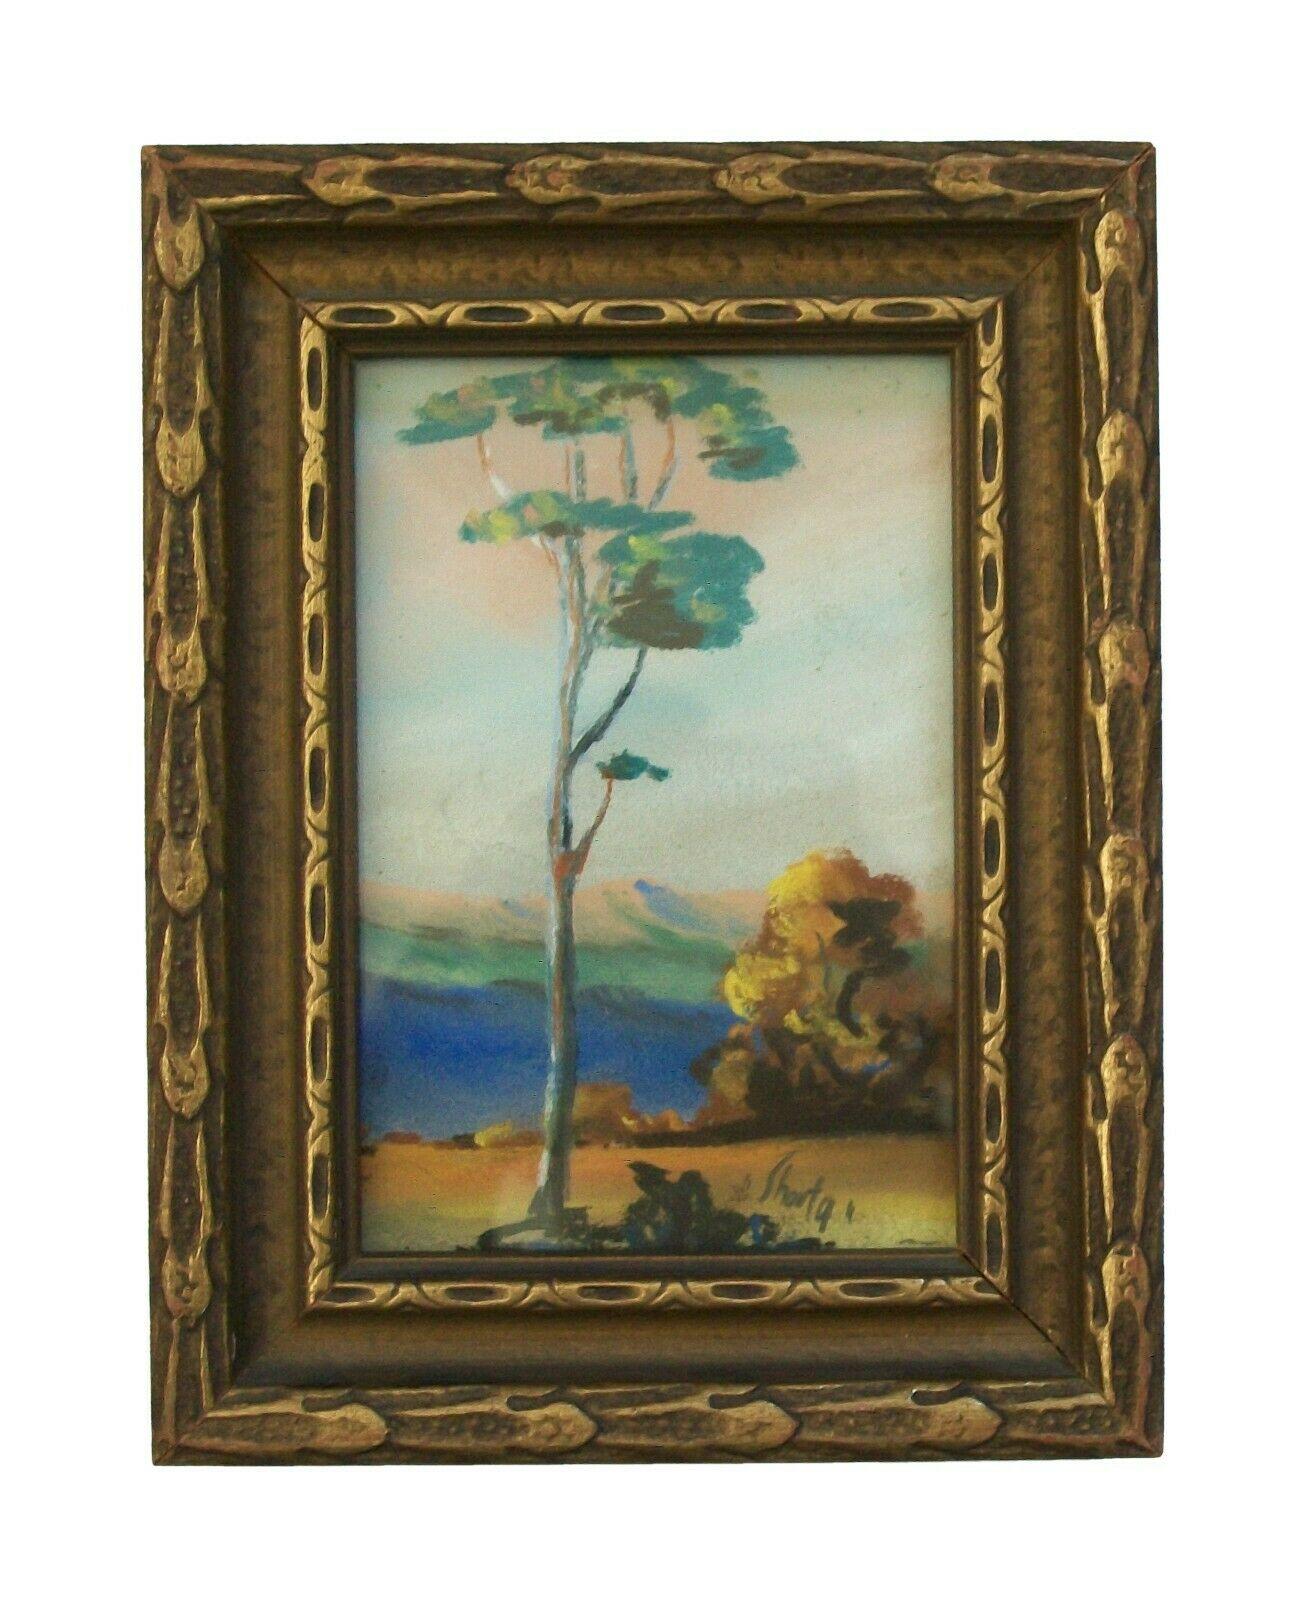 Hand-Crafted Miniature Pair of American Impressionist Framed Landscape Paintings, Circa 1900 For Sale